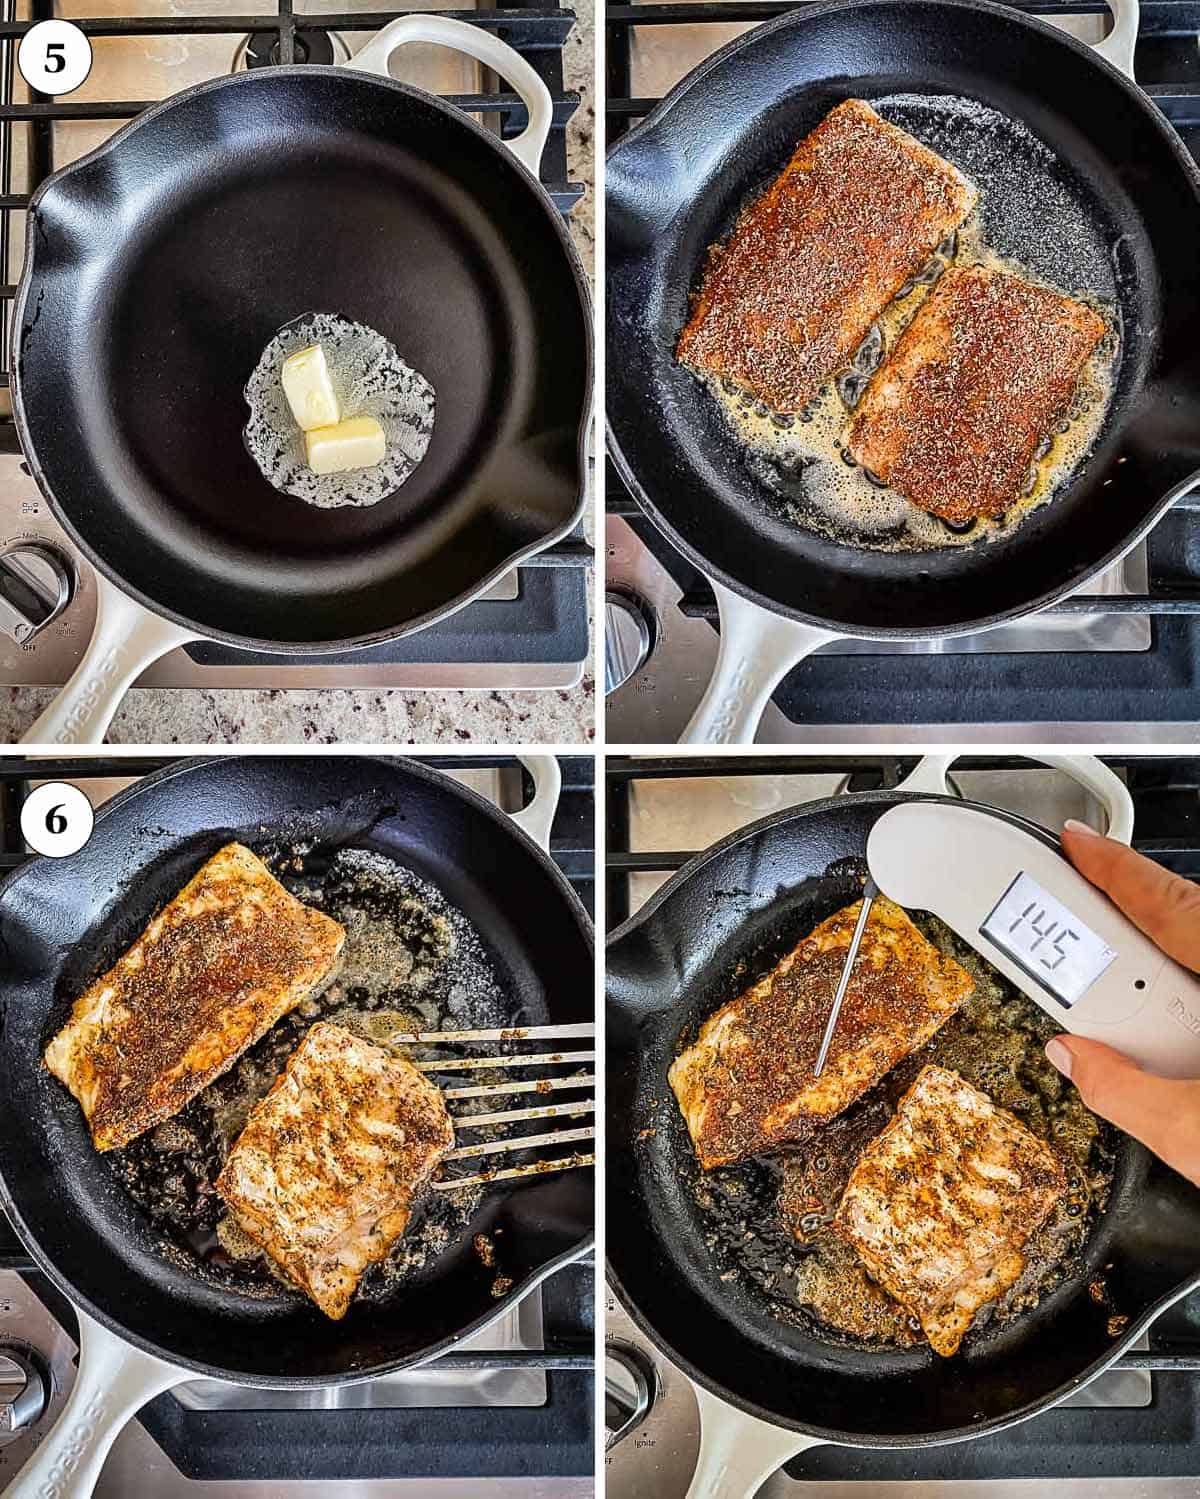 Seasoned cod being cooked in a cast iron skillet.